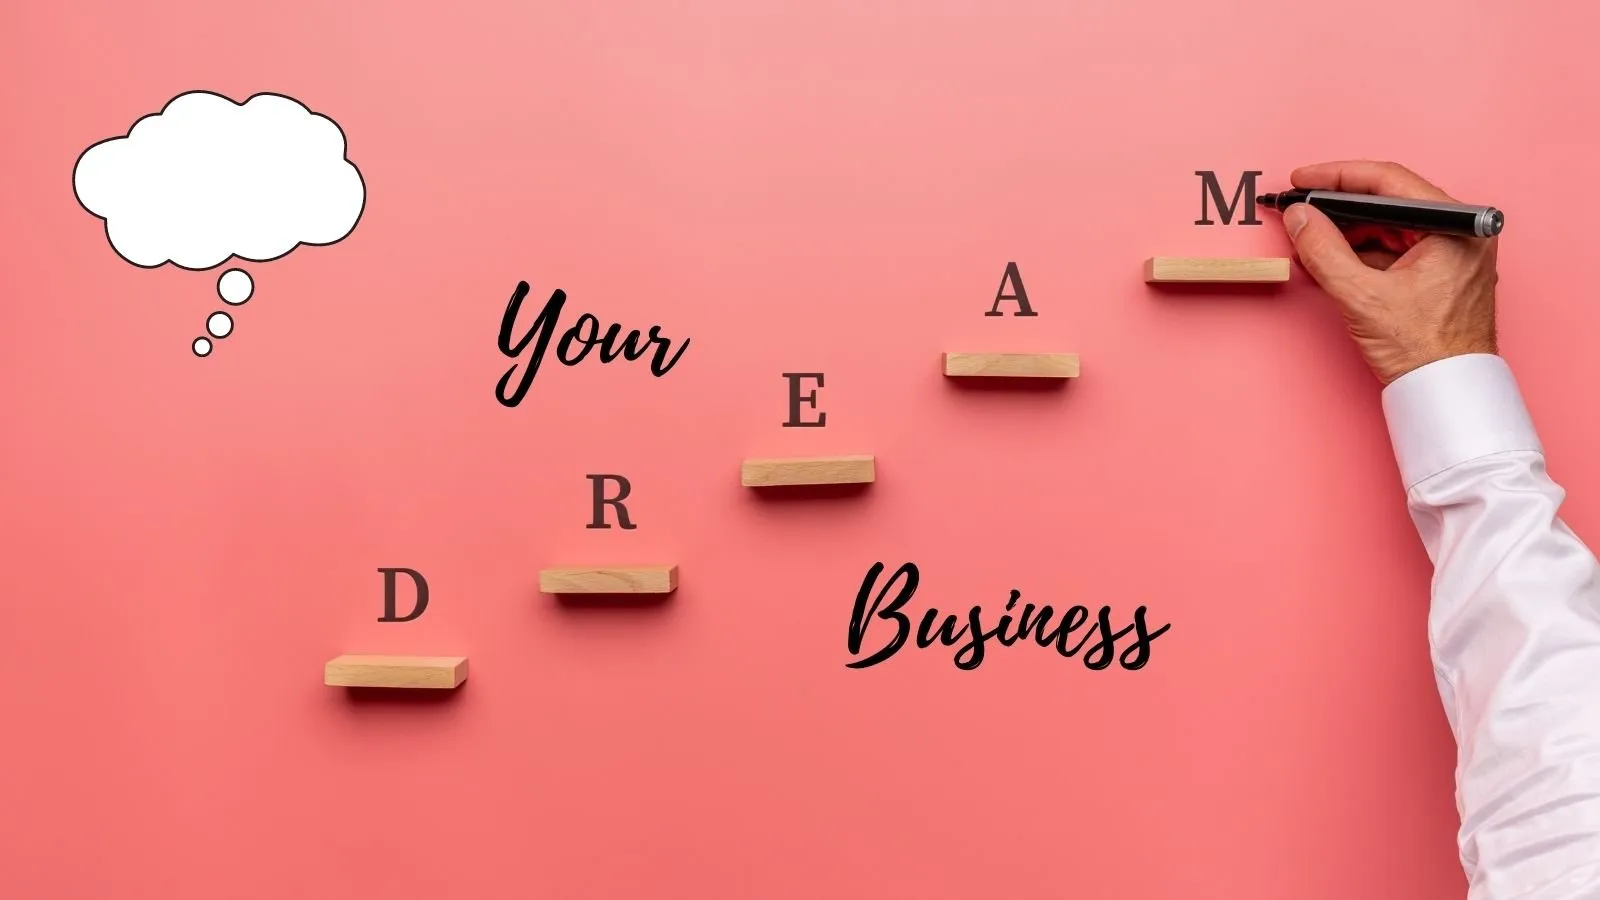 before starting your dream business